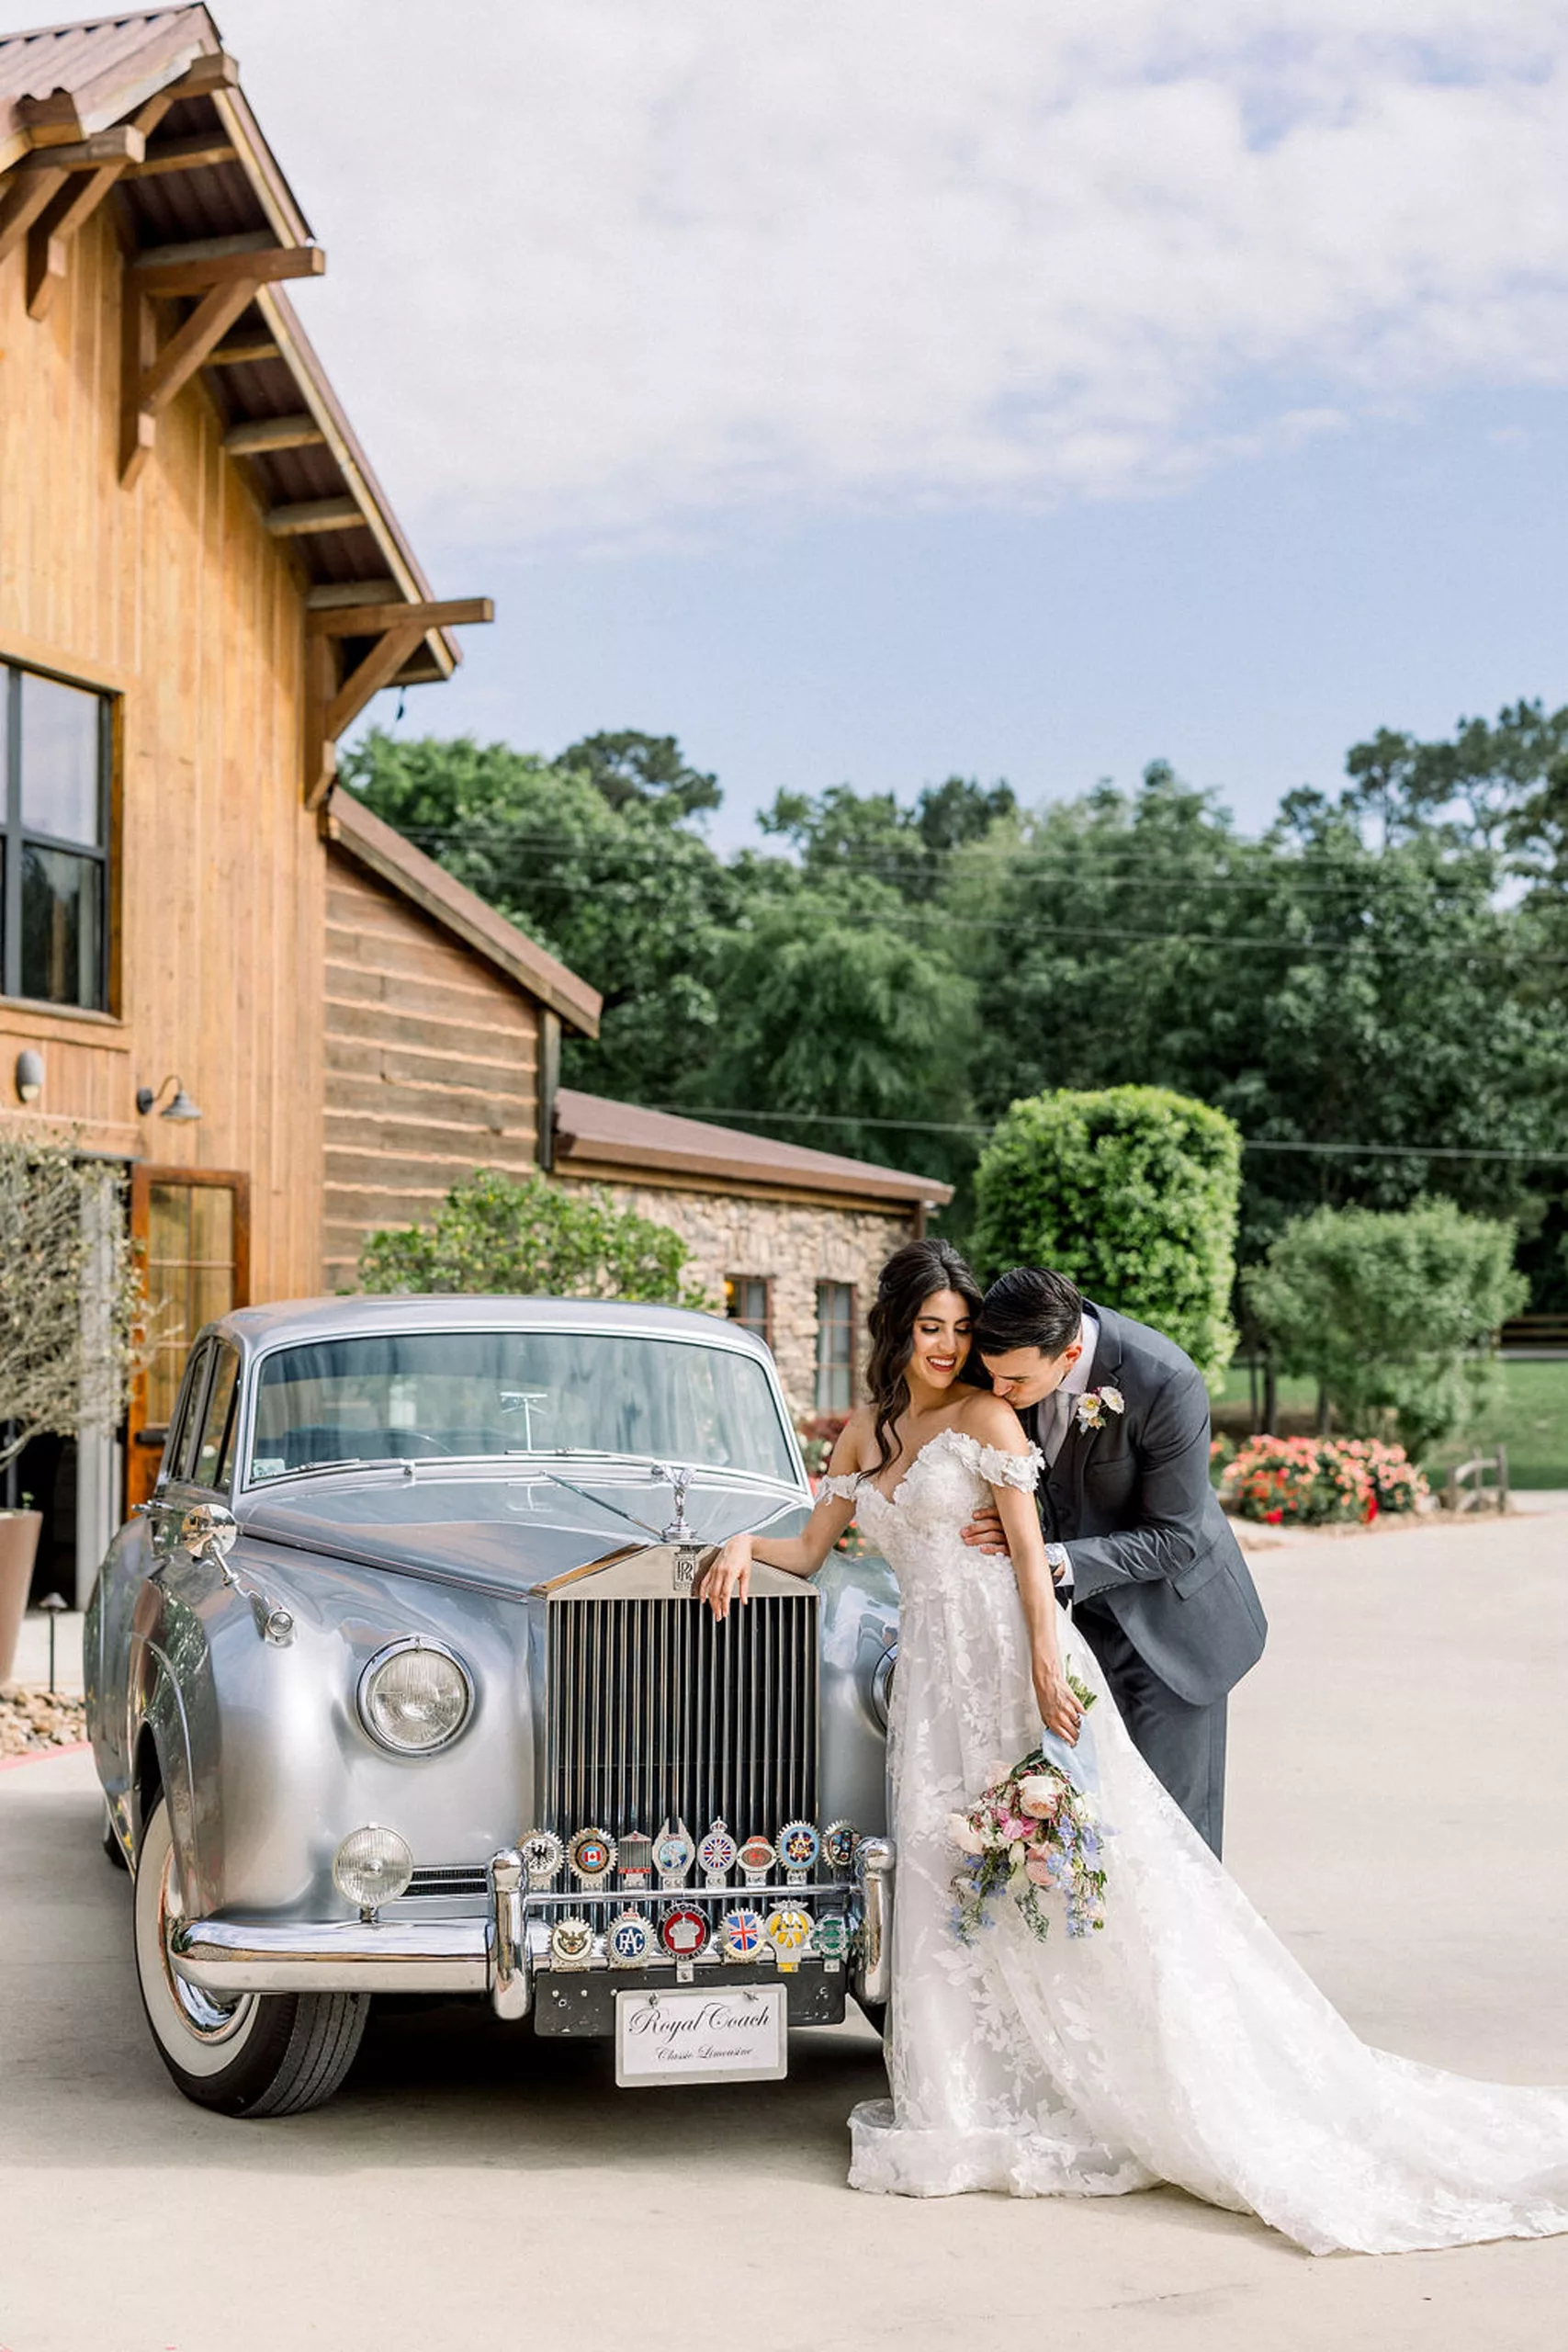 A groom in a grey suit kisses the shoulder of his bride as she leans on a silver Rolls Royce in the driveway of the iron manor wedding venue